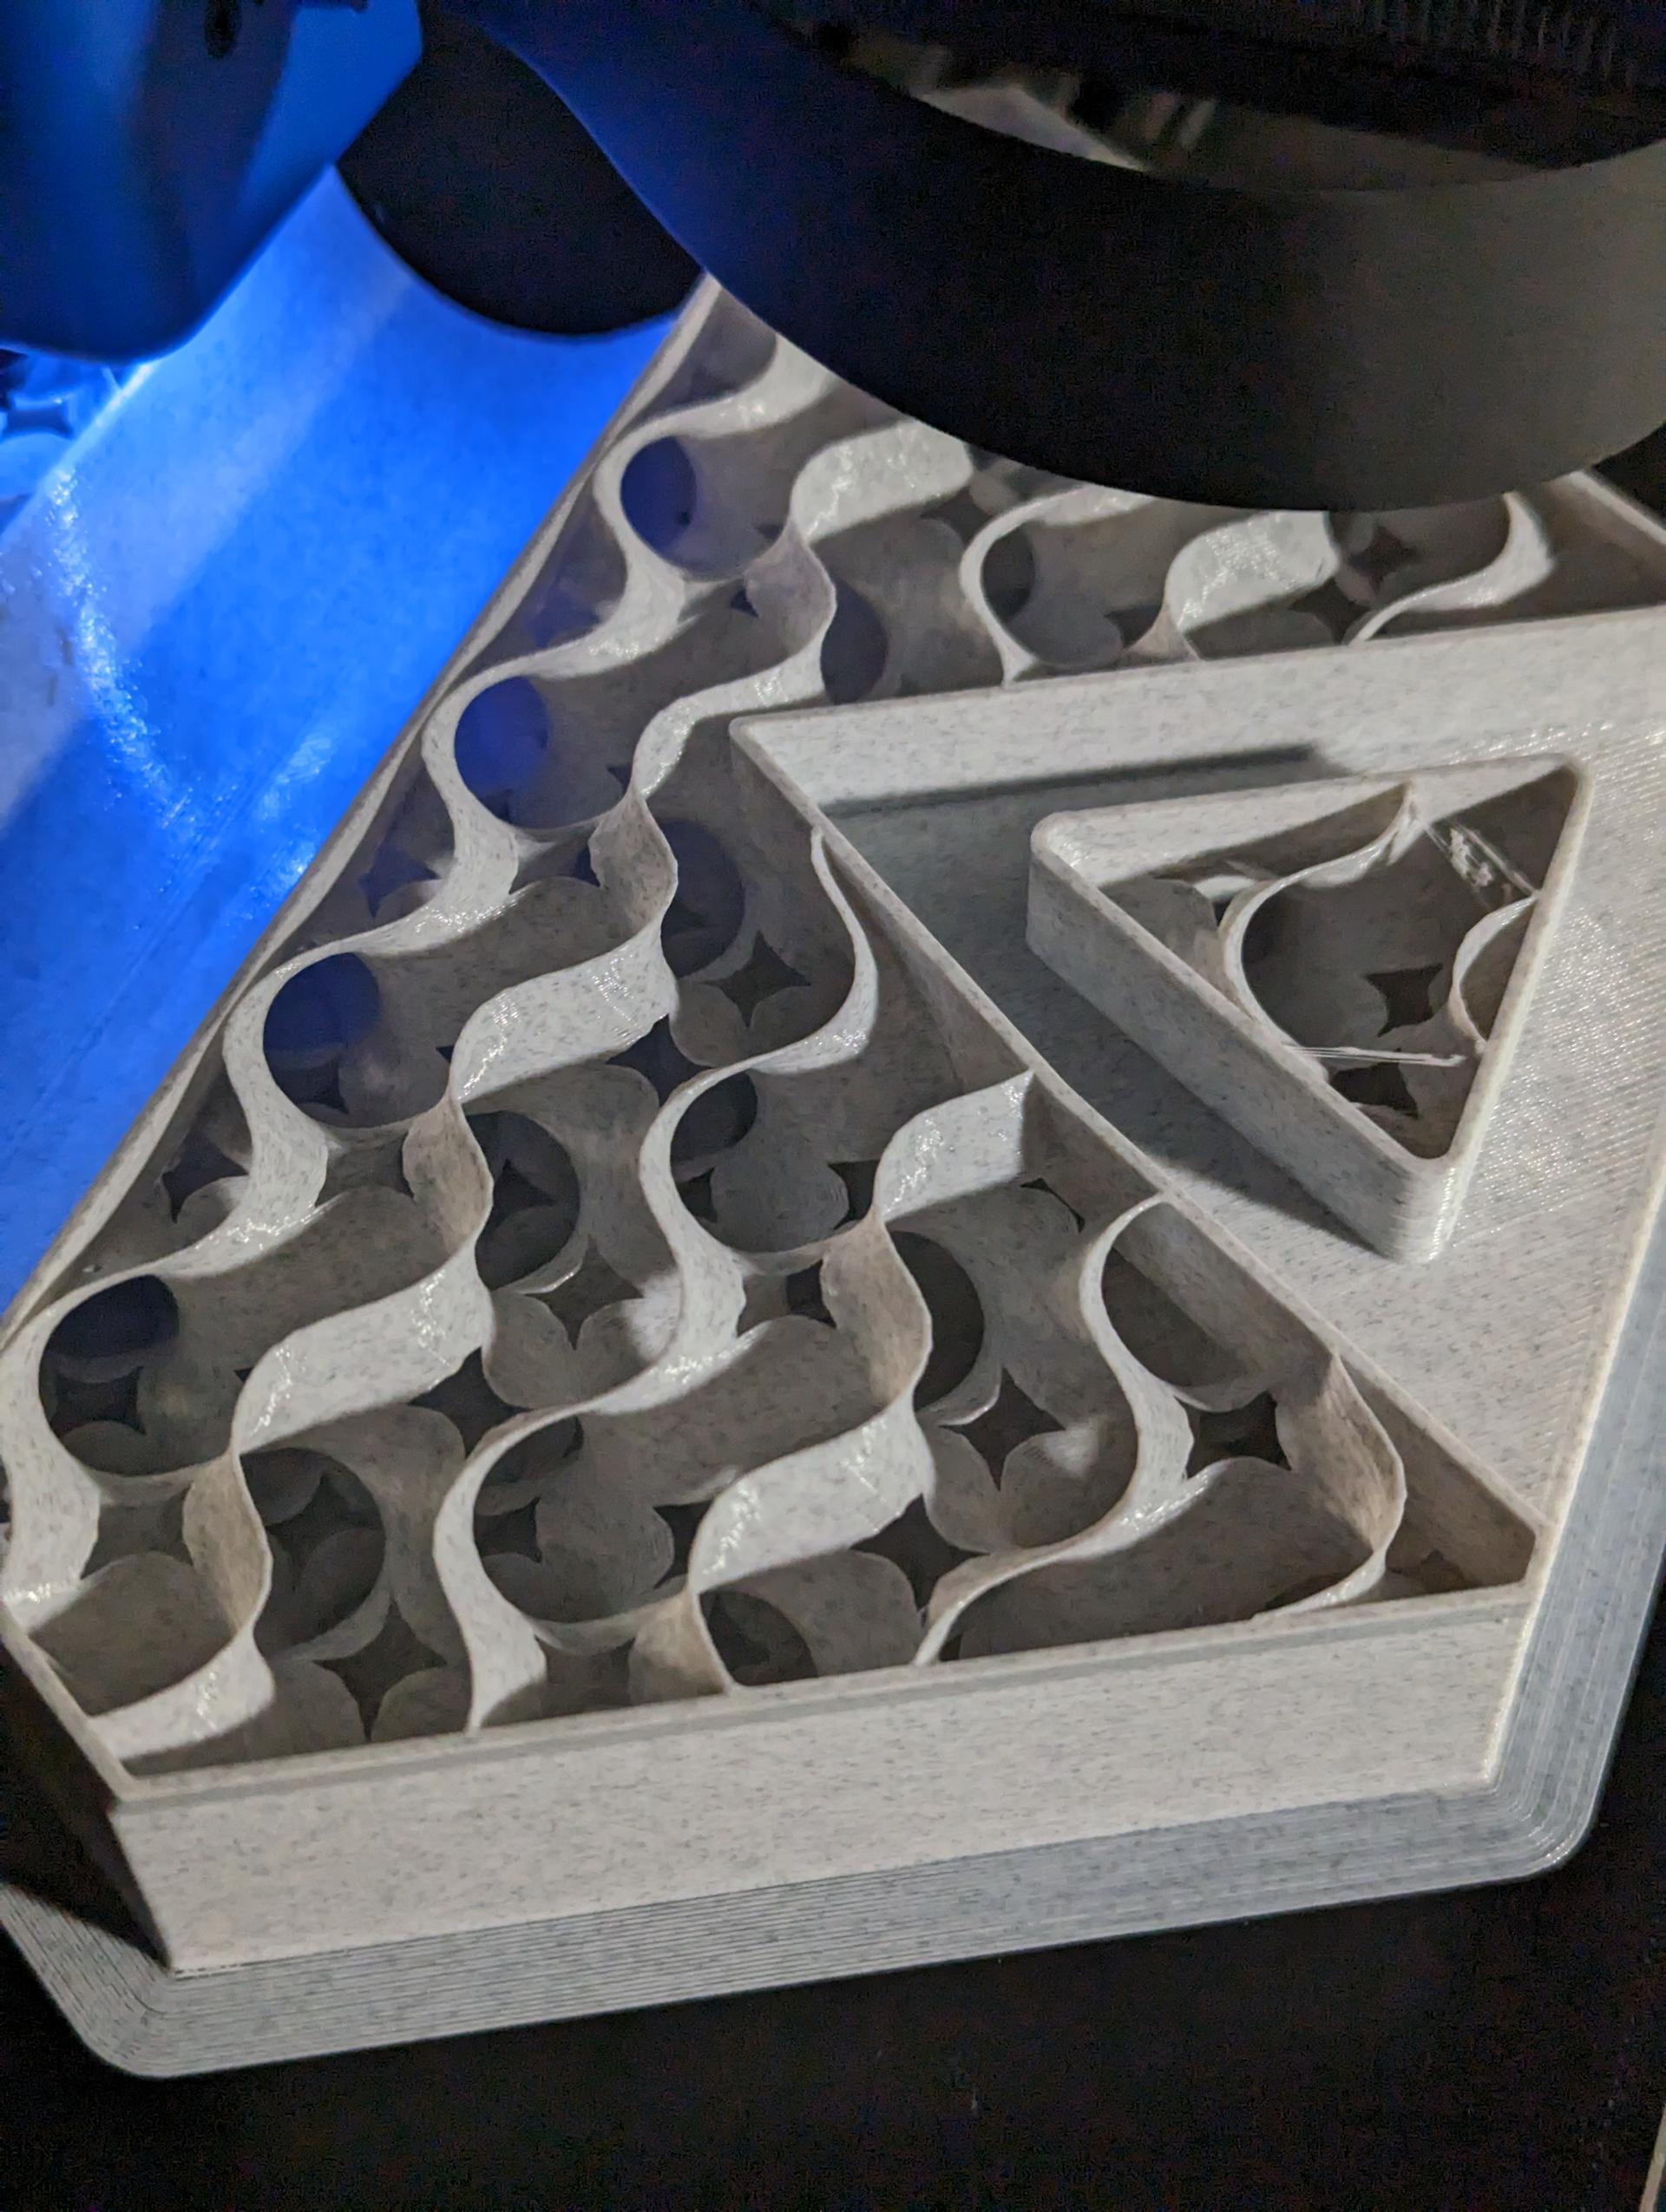 3D printer creates gyroid infill pattern on the full scale block.